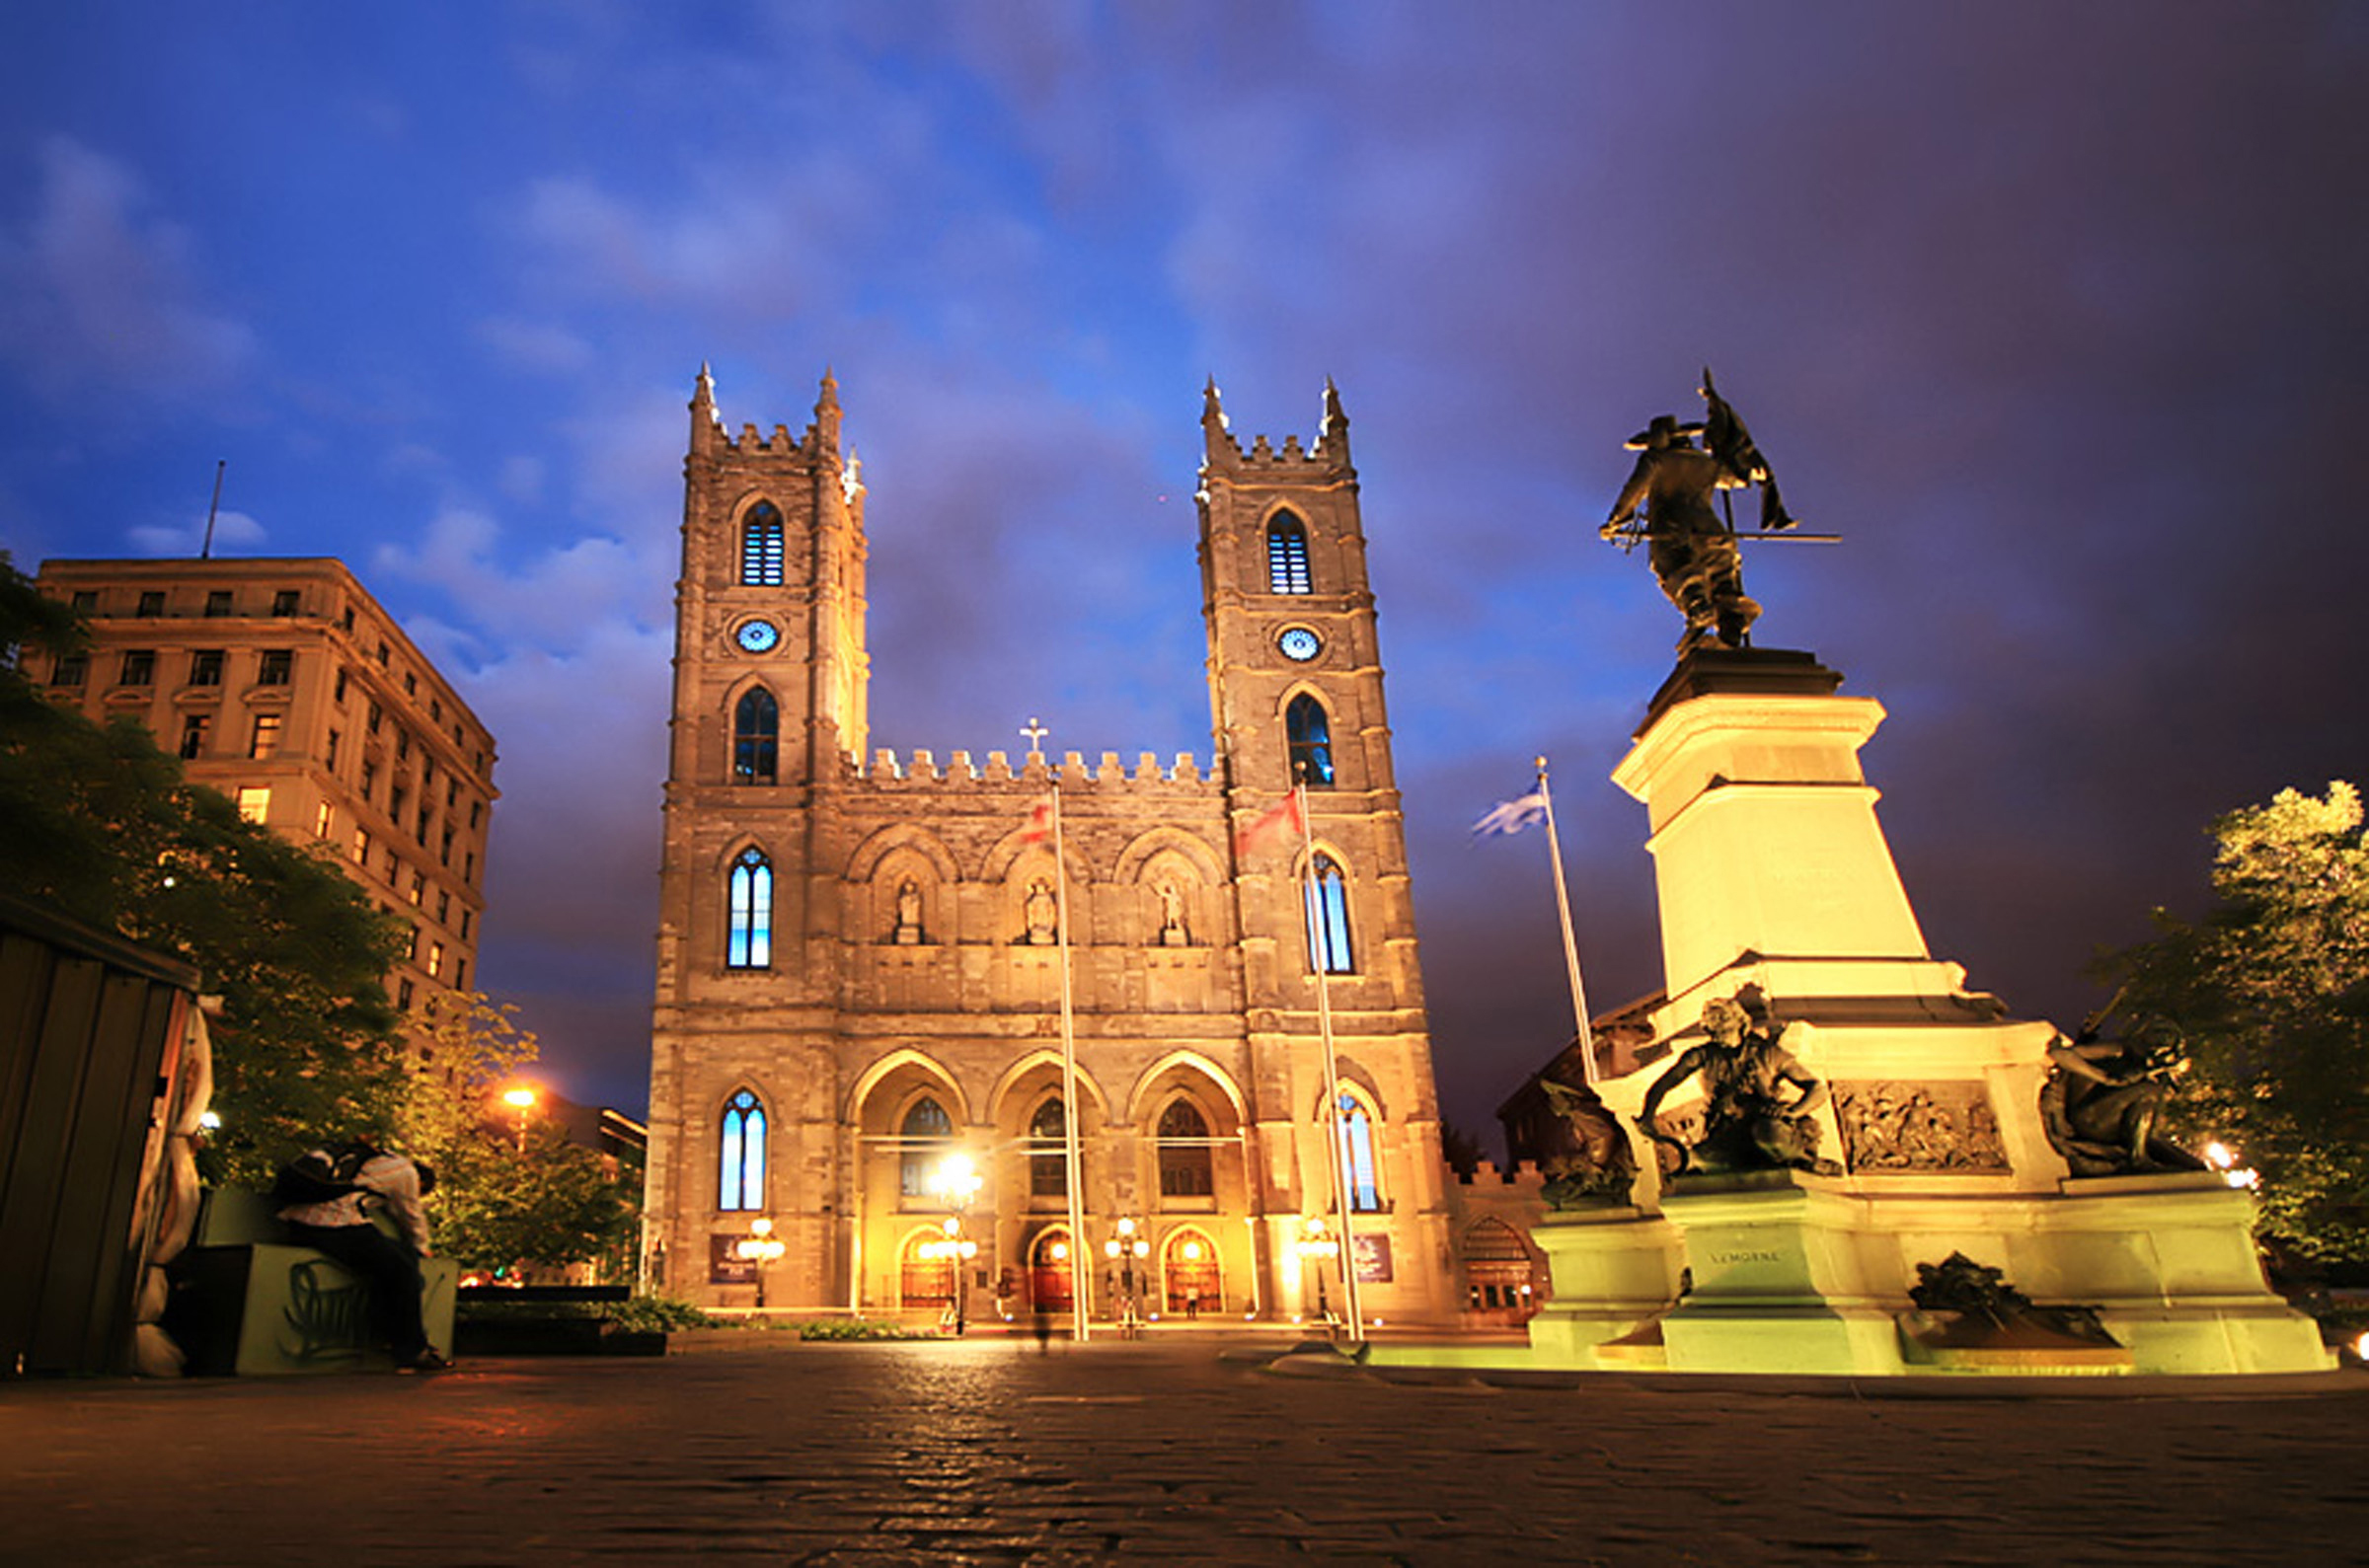 Place d’Armes in Old Montréal, the center of the city’s historic icons.  Image by L. Toshio Kishiyama / Getty